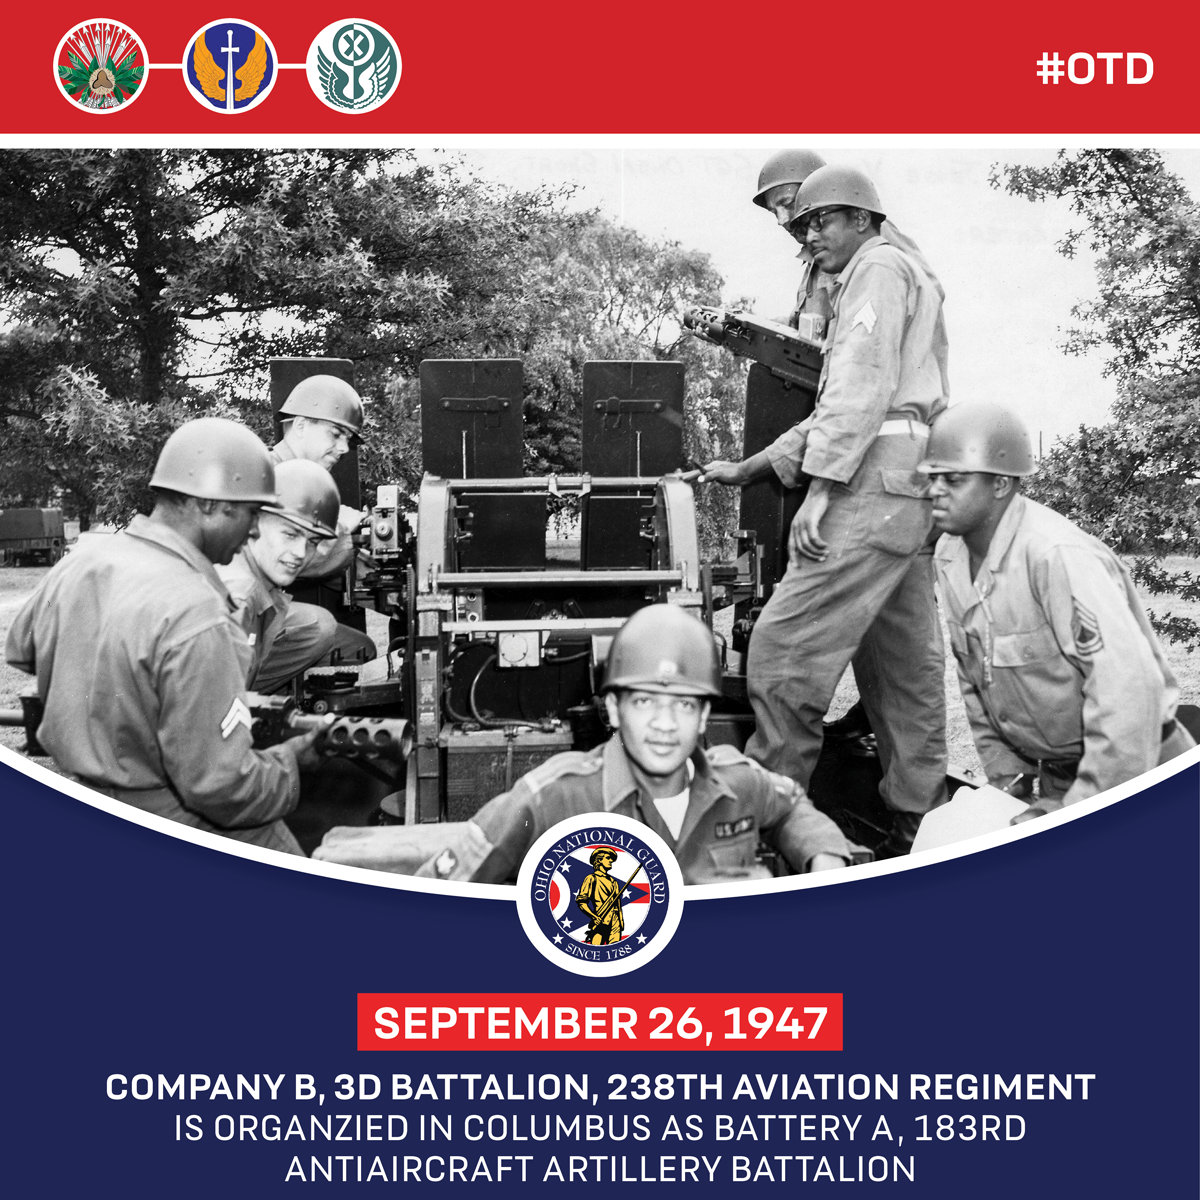 On this day in Ohio National Guard history, Sept. 26, 1947: Company B, 3rd Battalion, 238th Aviation Regiment is organized in Columbus as Battery A, 183rd Antiaircraft Artillery Battalion.
